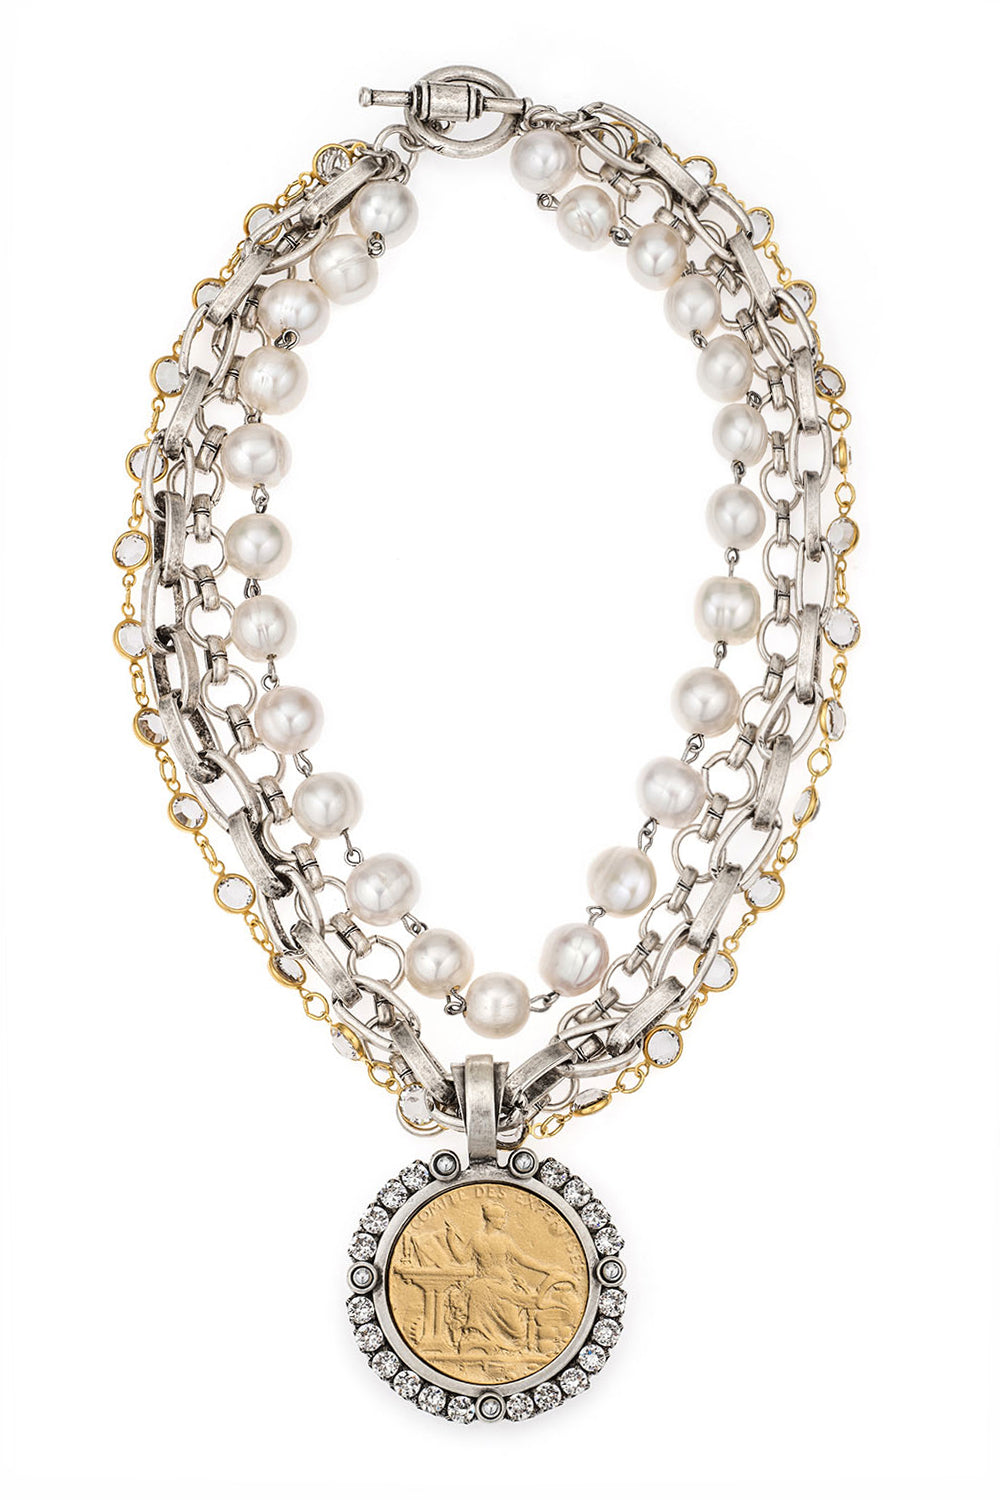 FOUR STRAND AUSTRIAN CRYSTAL, PEARL AND CHAINS WITH COMITE MEDALLION AND AUSTRIAN CRYSTAL